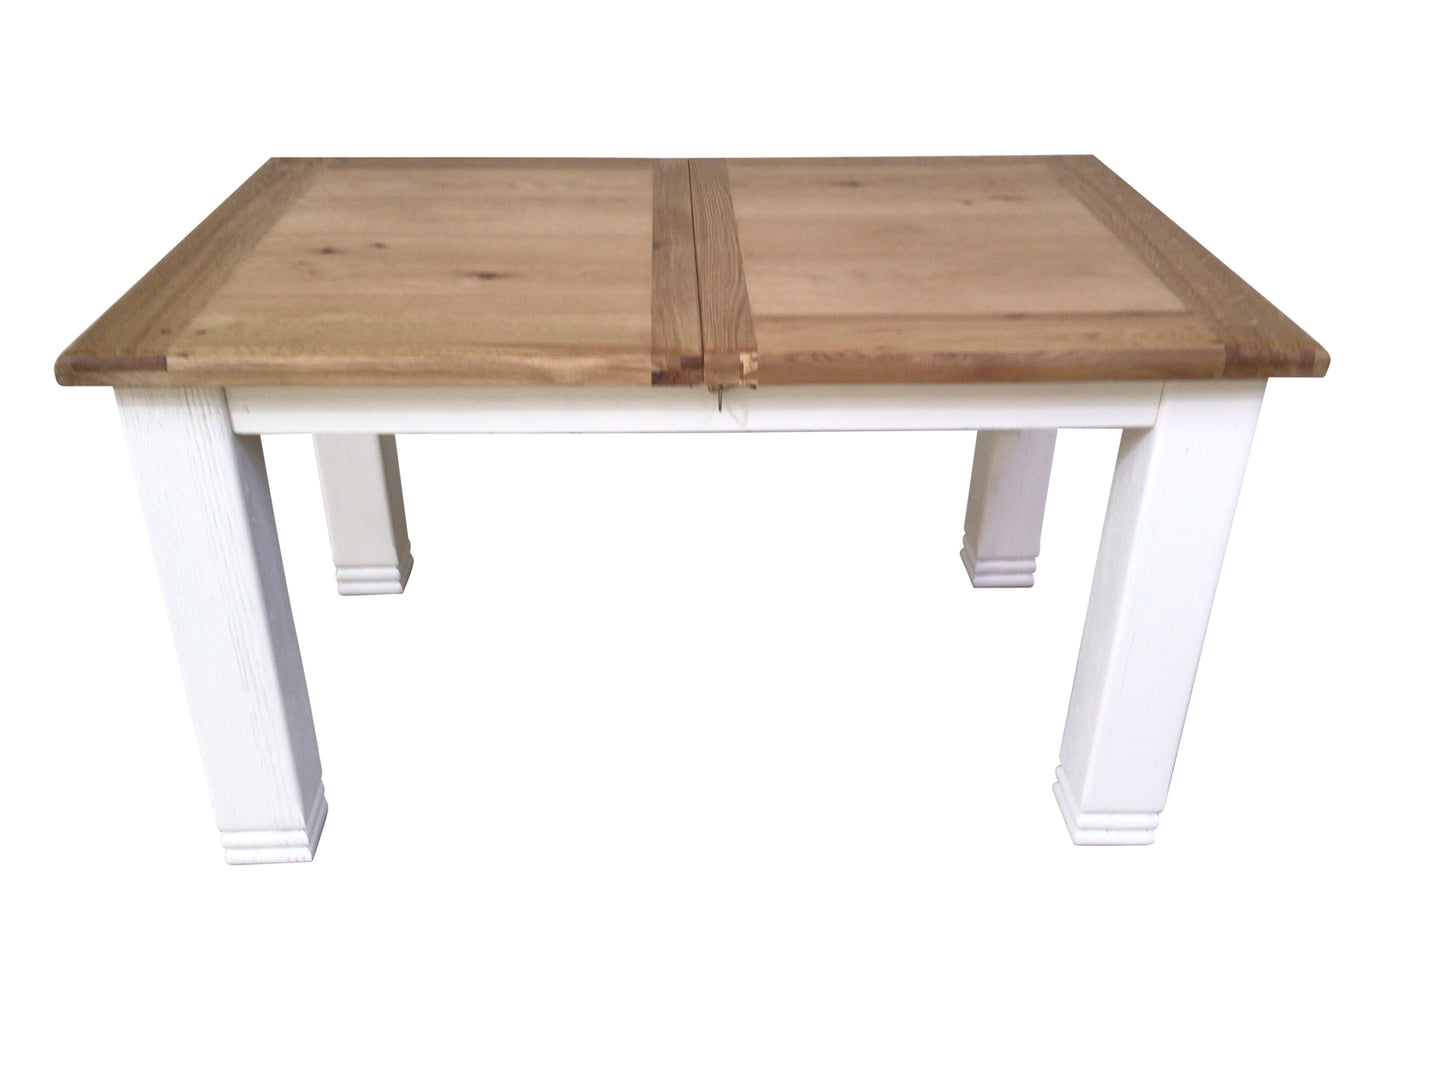 Danube Oak 1.4m Extension Dining Set painted Off - White